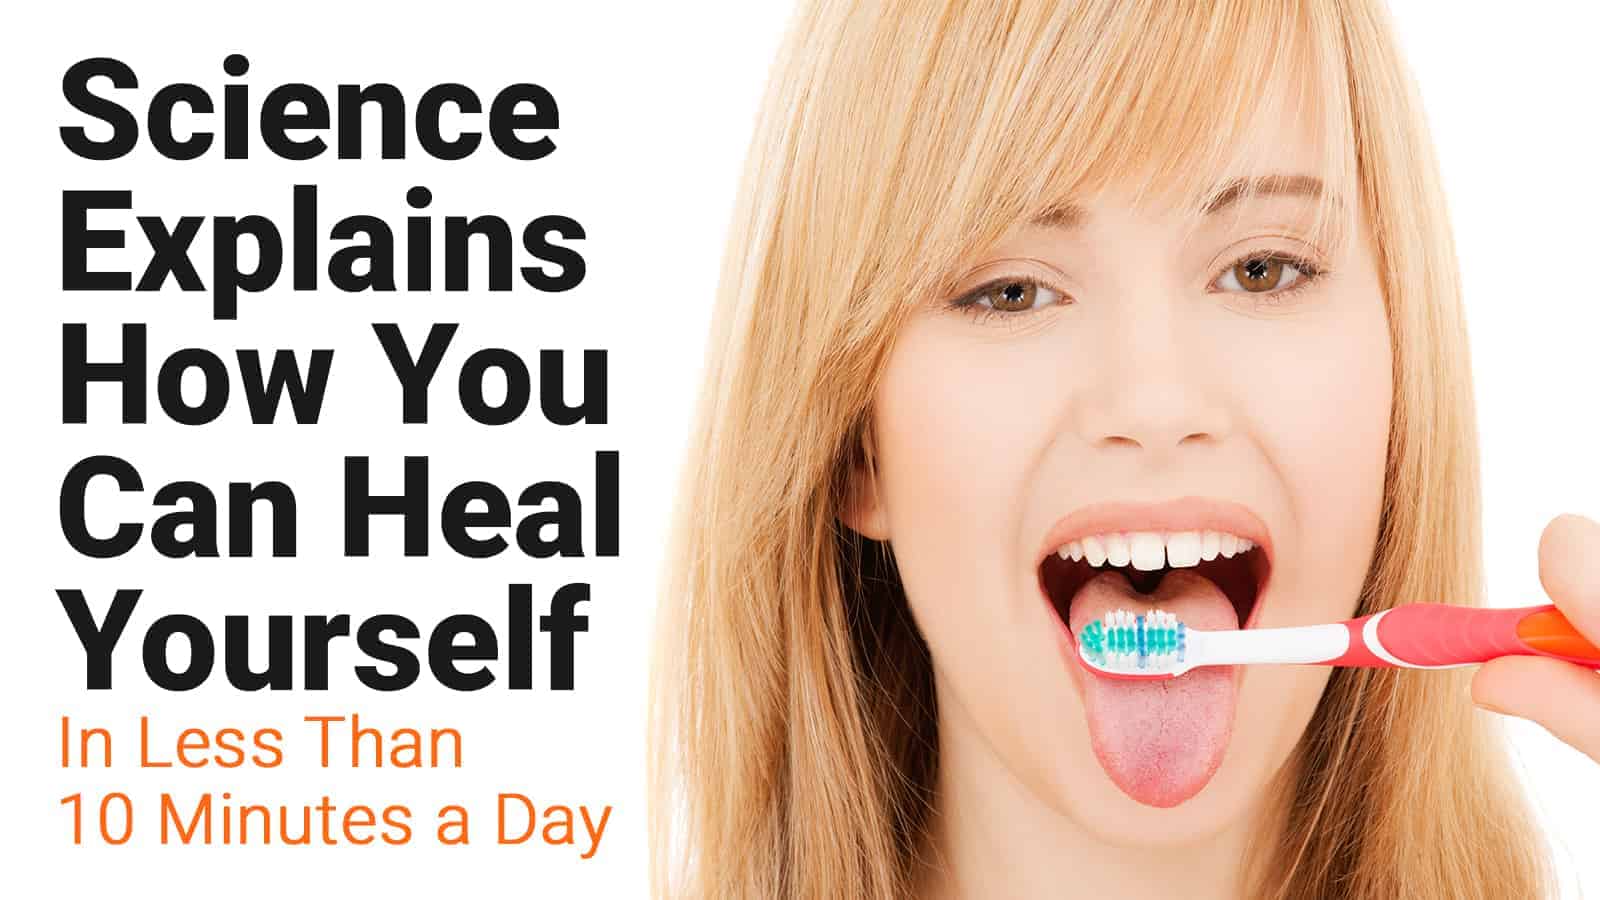 Science Explains How You Can Heal Yourself (In Less Than 10 Minutes a Day)